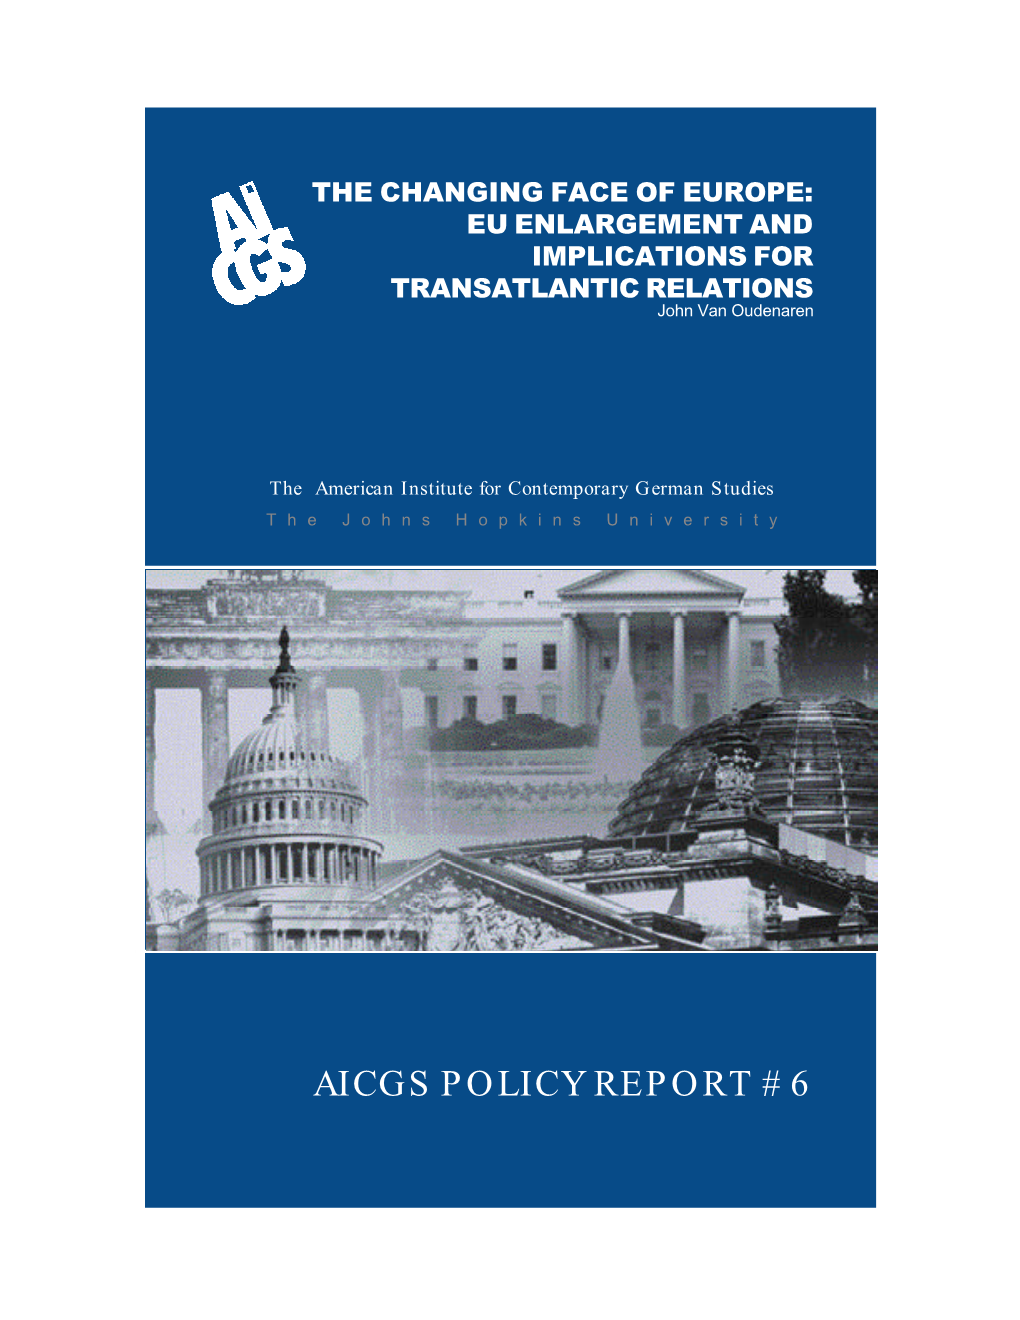 Aicgs Policy Report #6 the Changing Face of Europe: Eu Enlargement and Implications for Transatlantic Relations